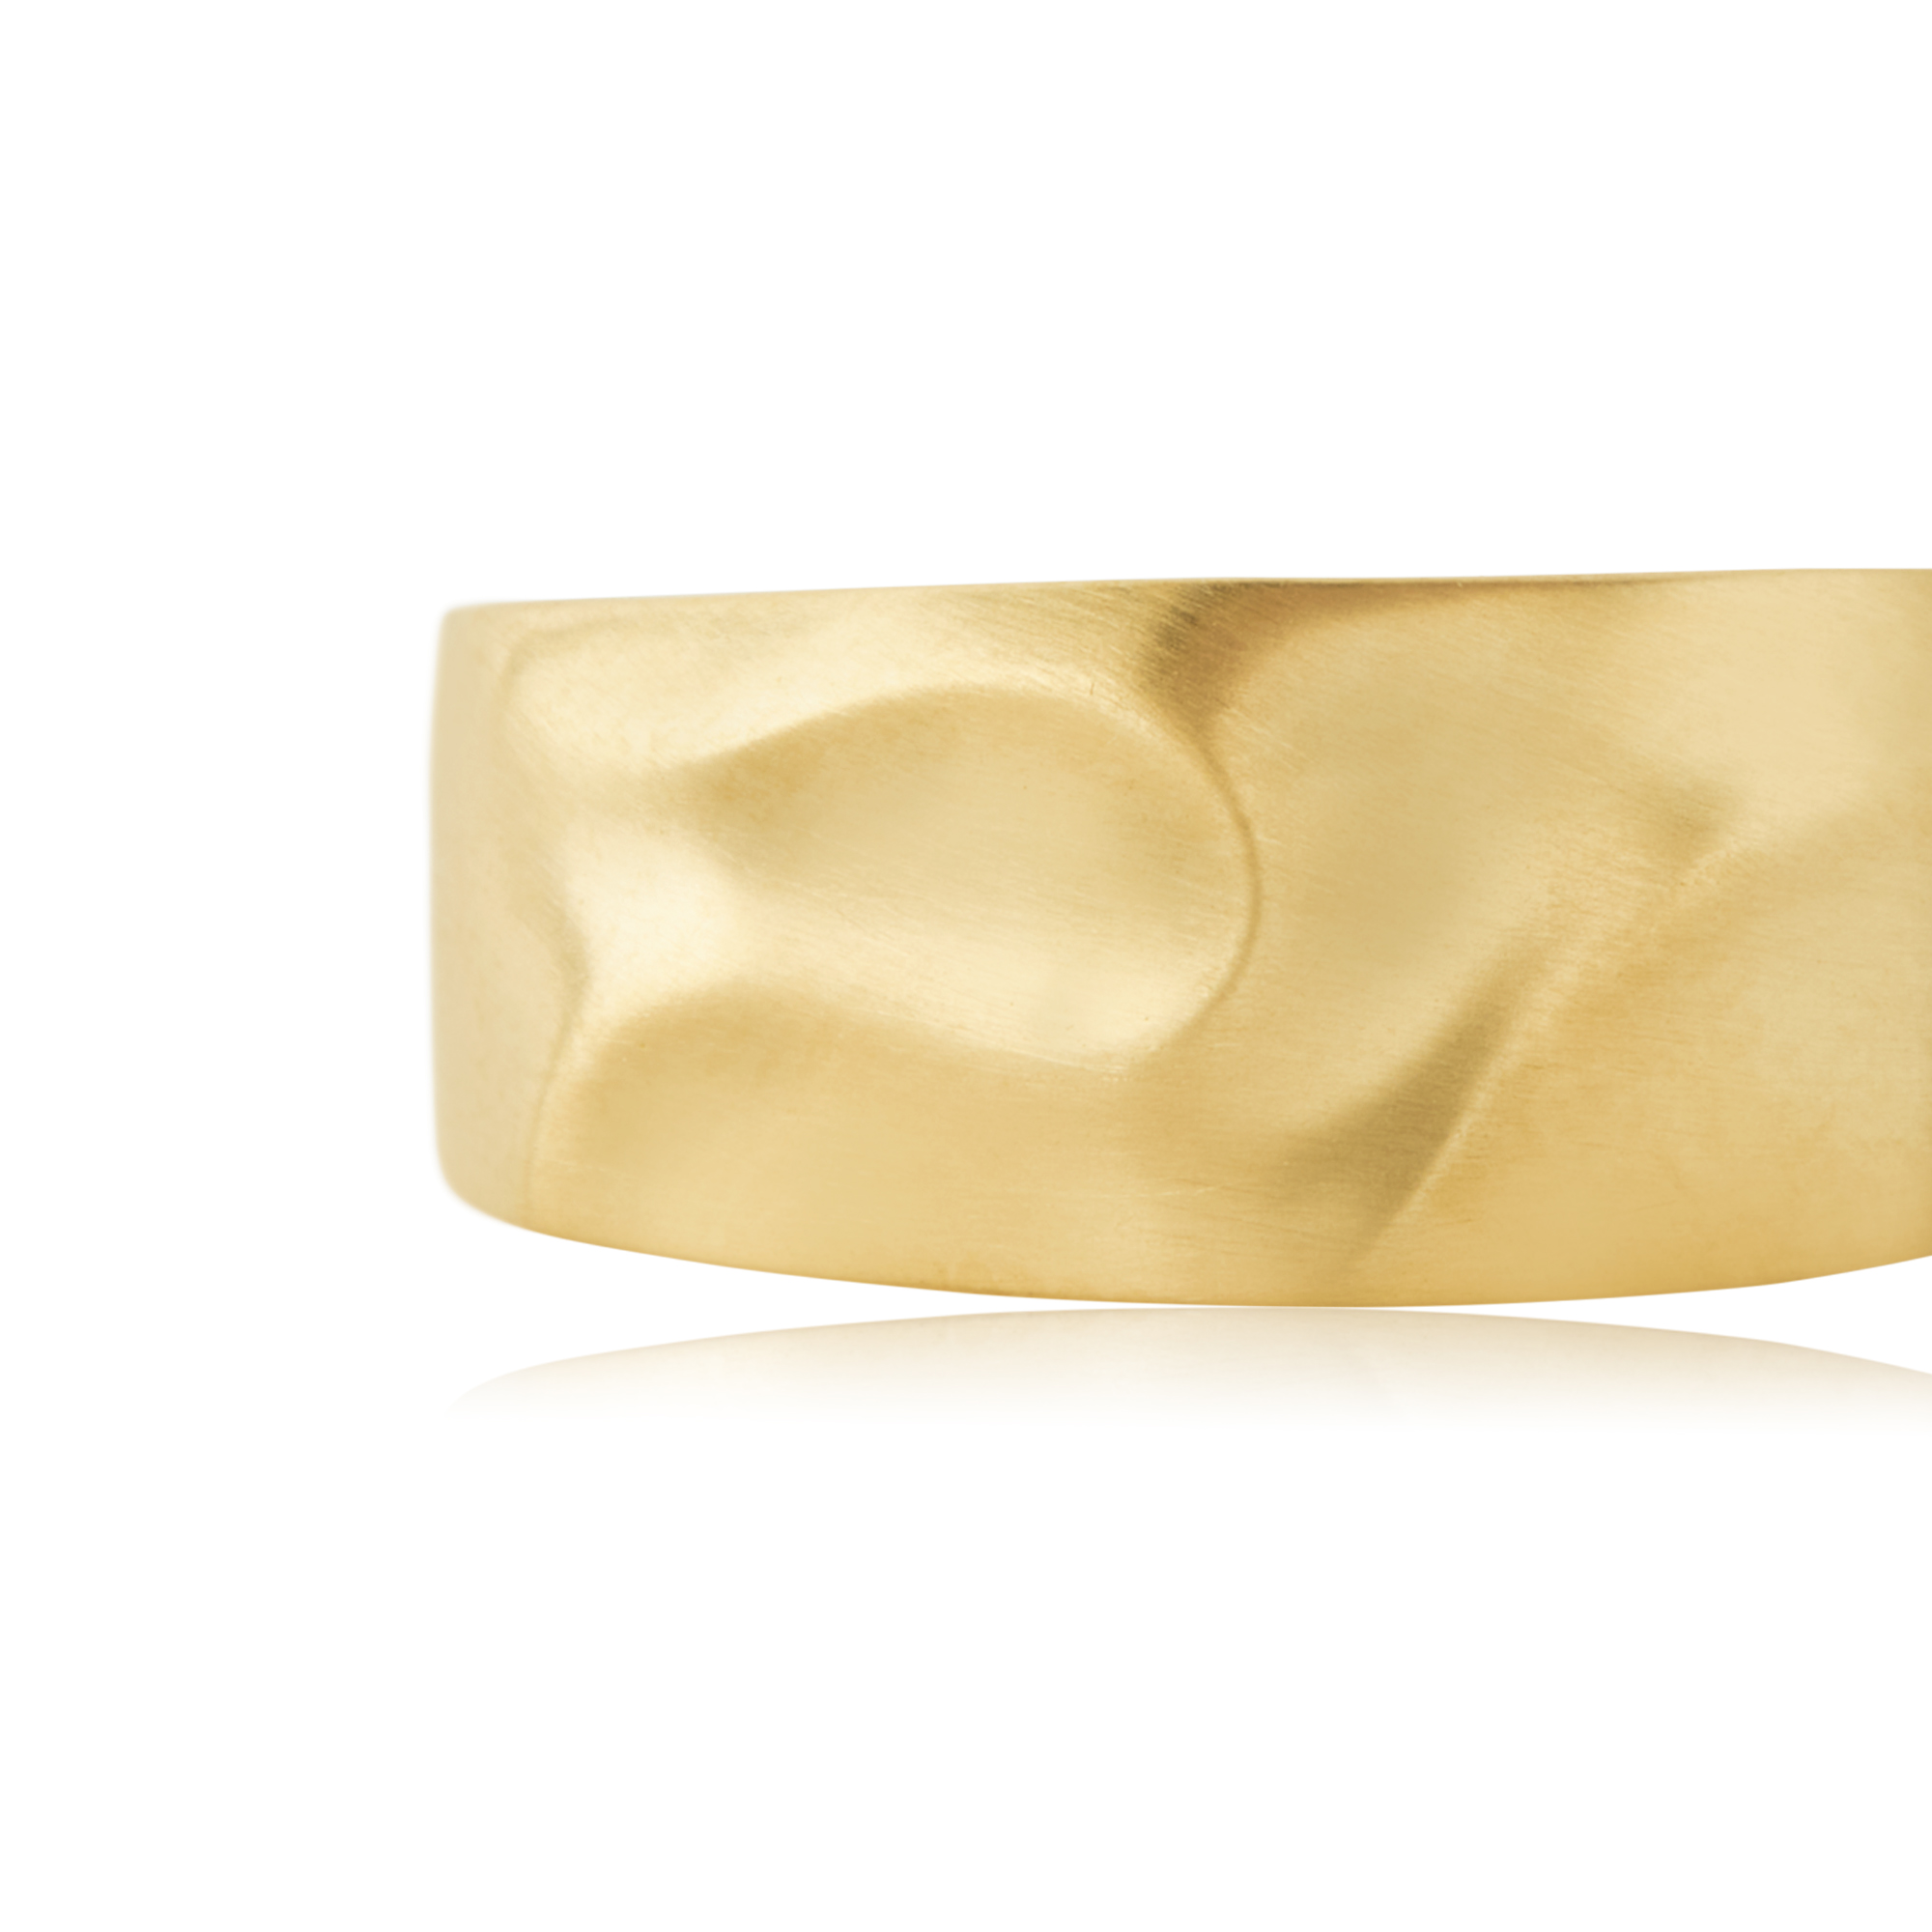 Wide gold wedding band